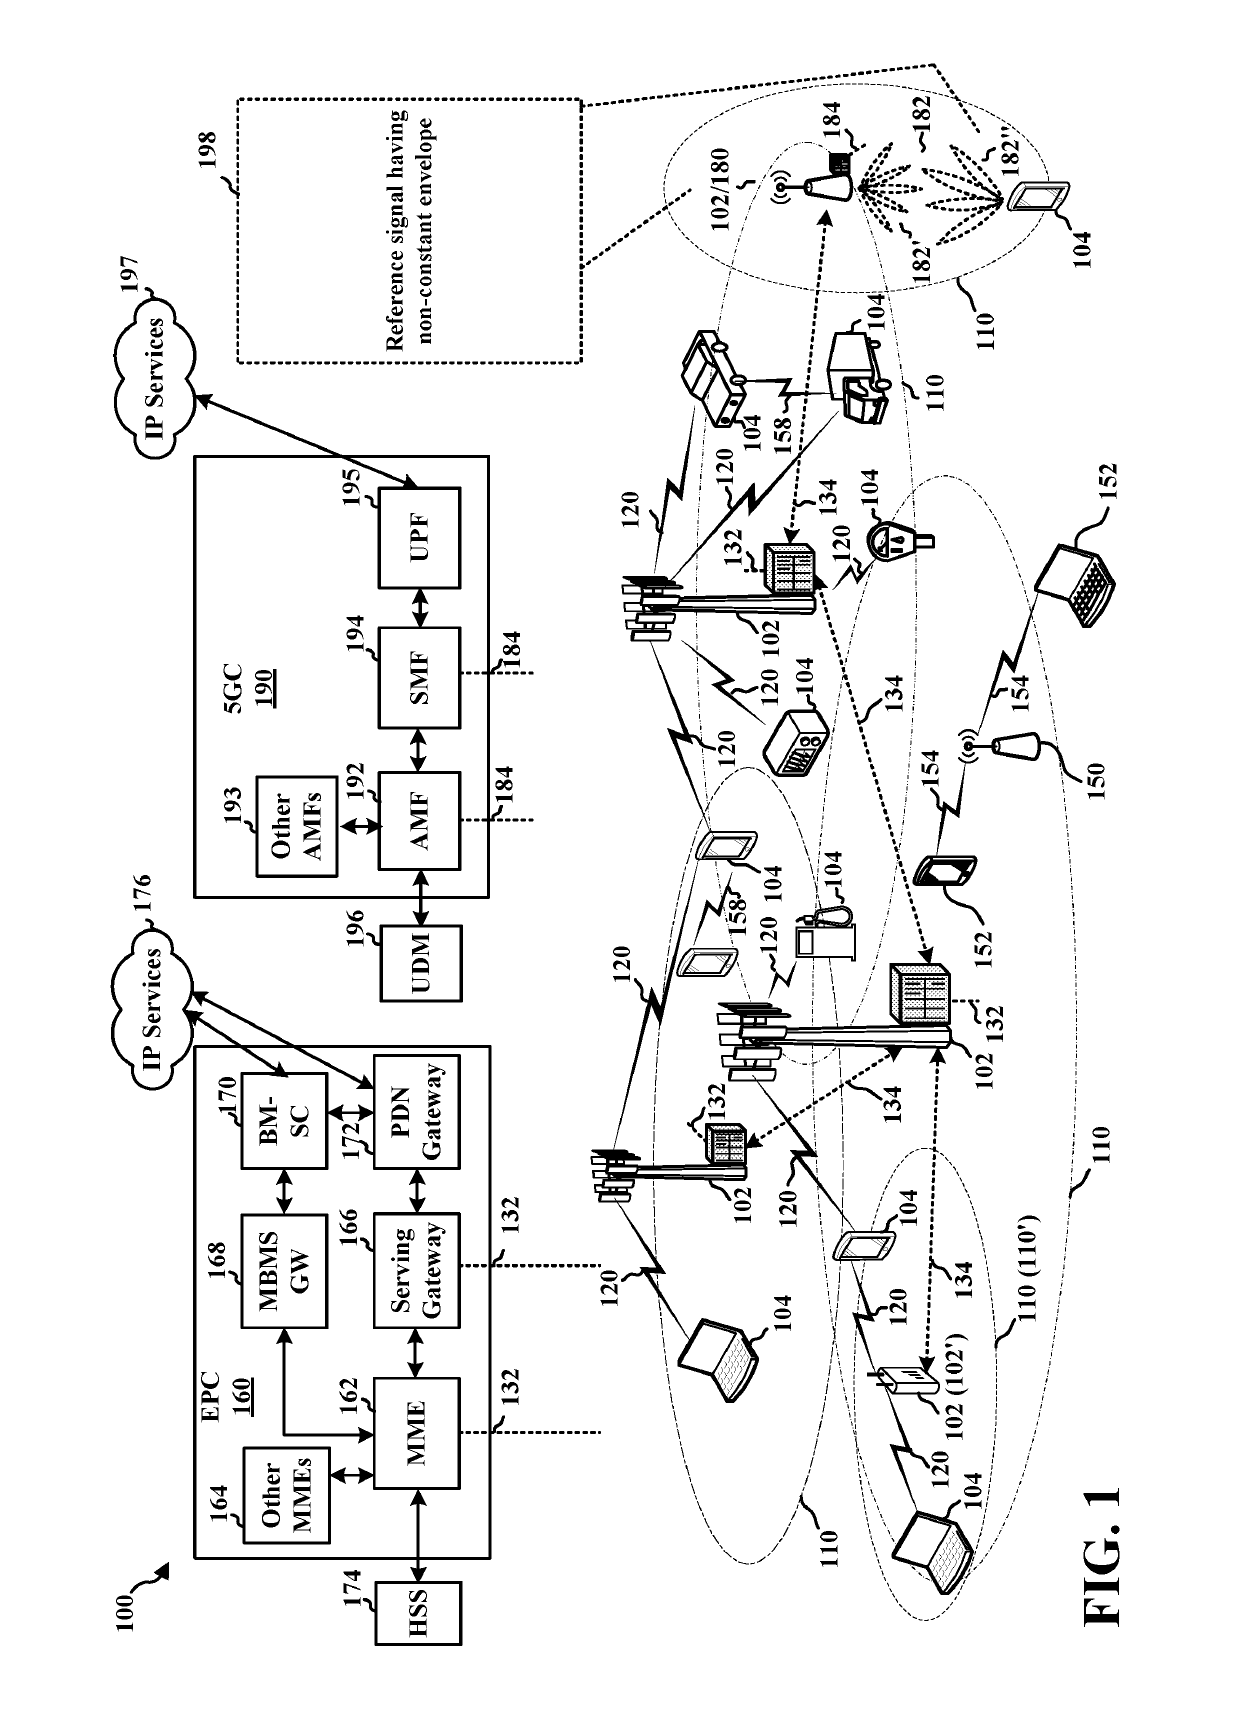 System and method for nonlinearity estimation with reference signals